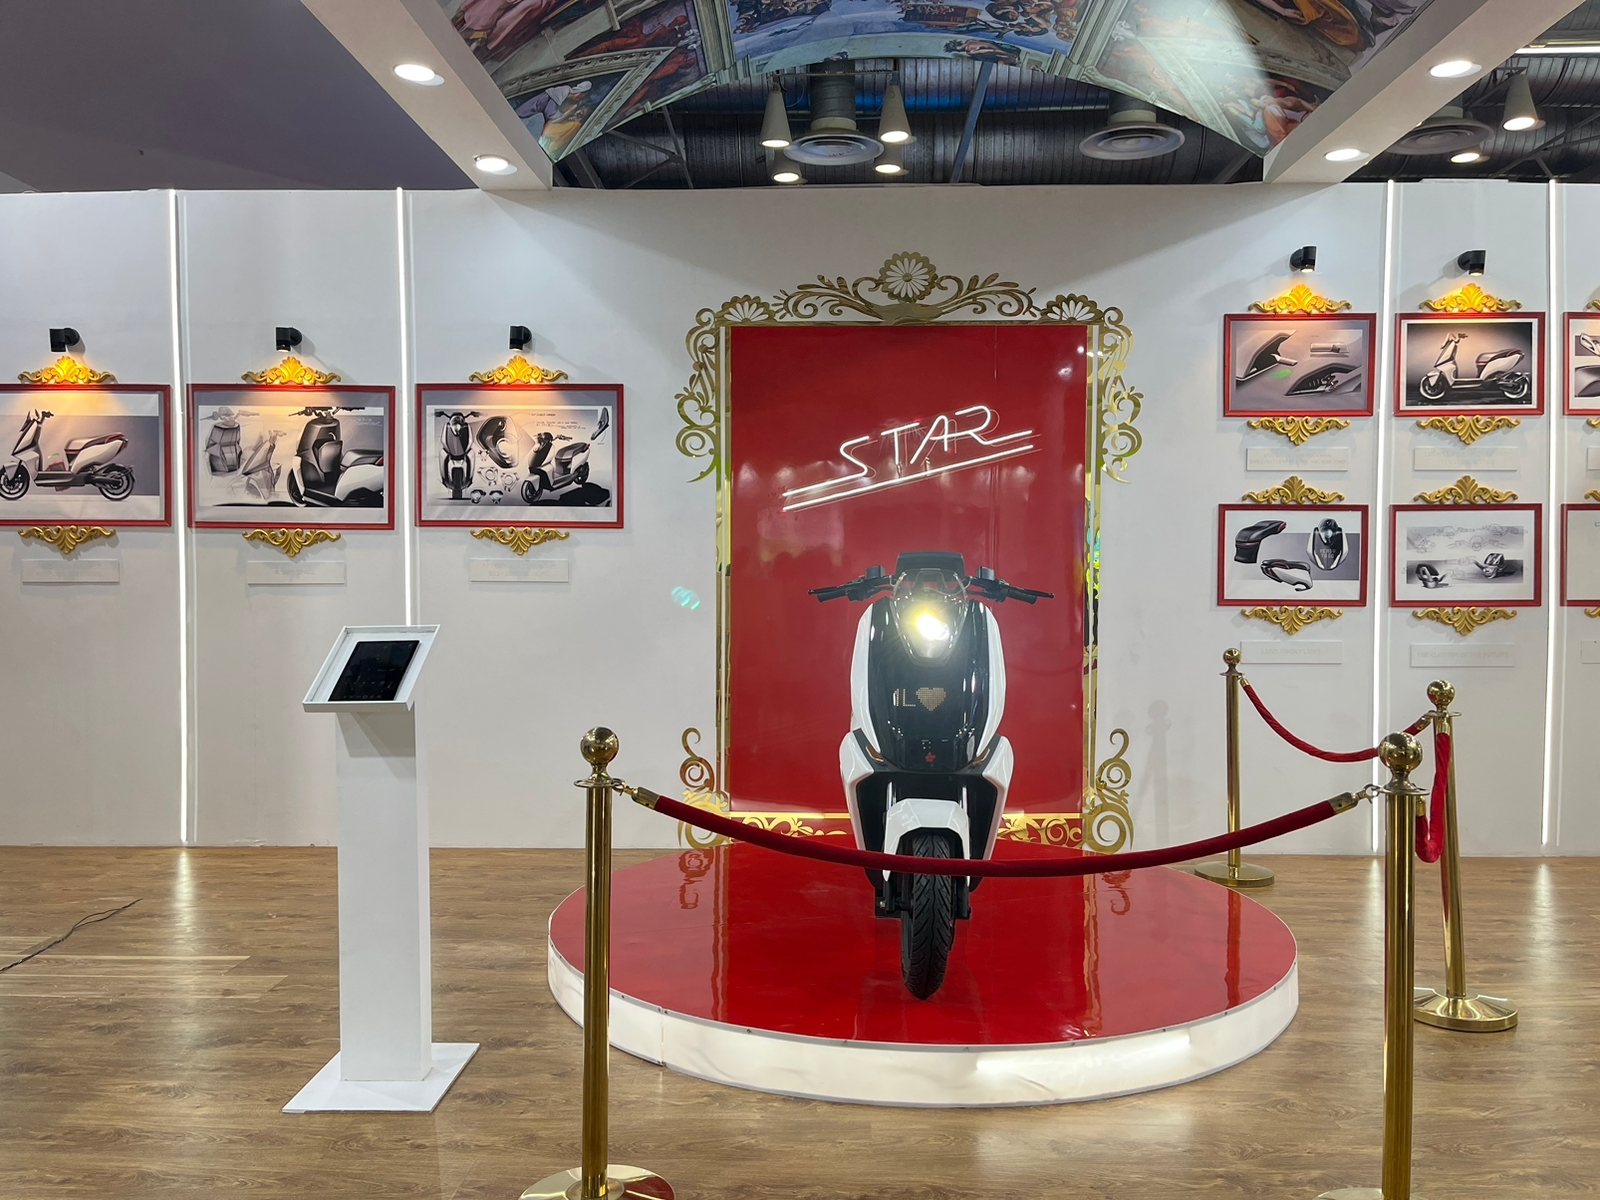 LML Star Electrical Scooter made its debut at Auto Expo 2023